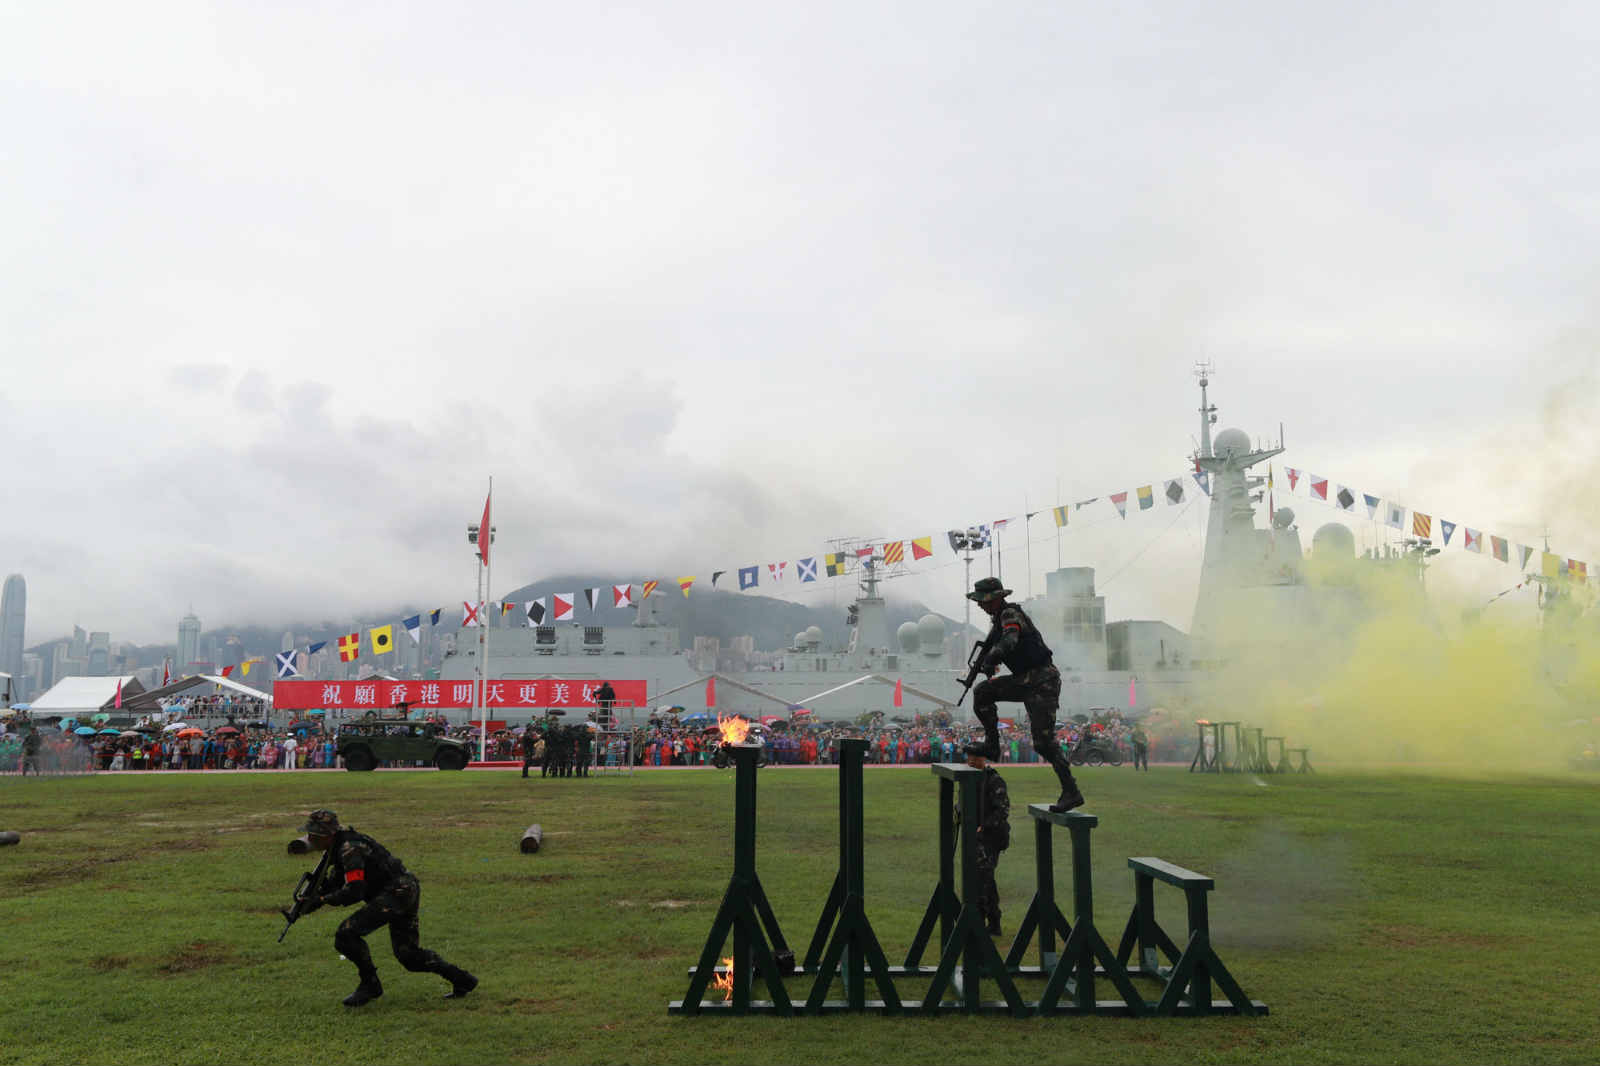 The soldiers of the PLA Hong Kong Garrison demonstrate for the visitors on the camp-open day in the Ngong Shuen Chau Barracks. In order to celebrate the 20th anniversary of Hong Kong's return to the motherland, the Ngong Shuen Chau Barracks of the PLA Hong Kong Garrison held the camp-open day activities on the morning of July 8, 2017. (eng.chinamil.com.cn/Photo by Zhou Hanqing)